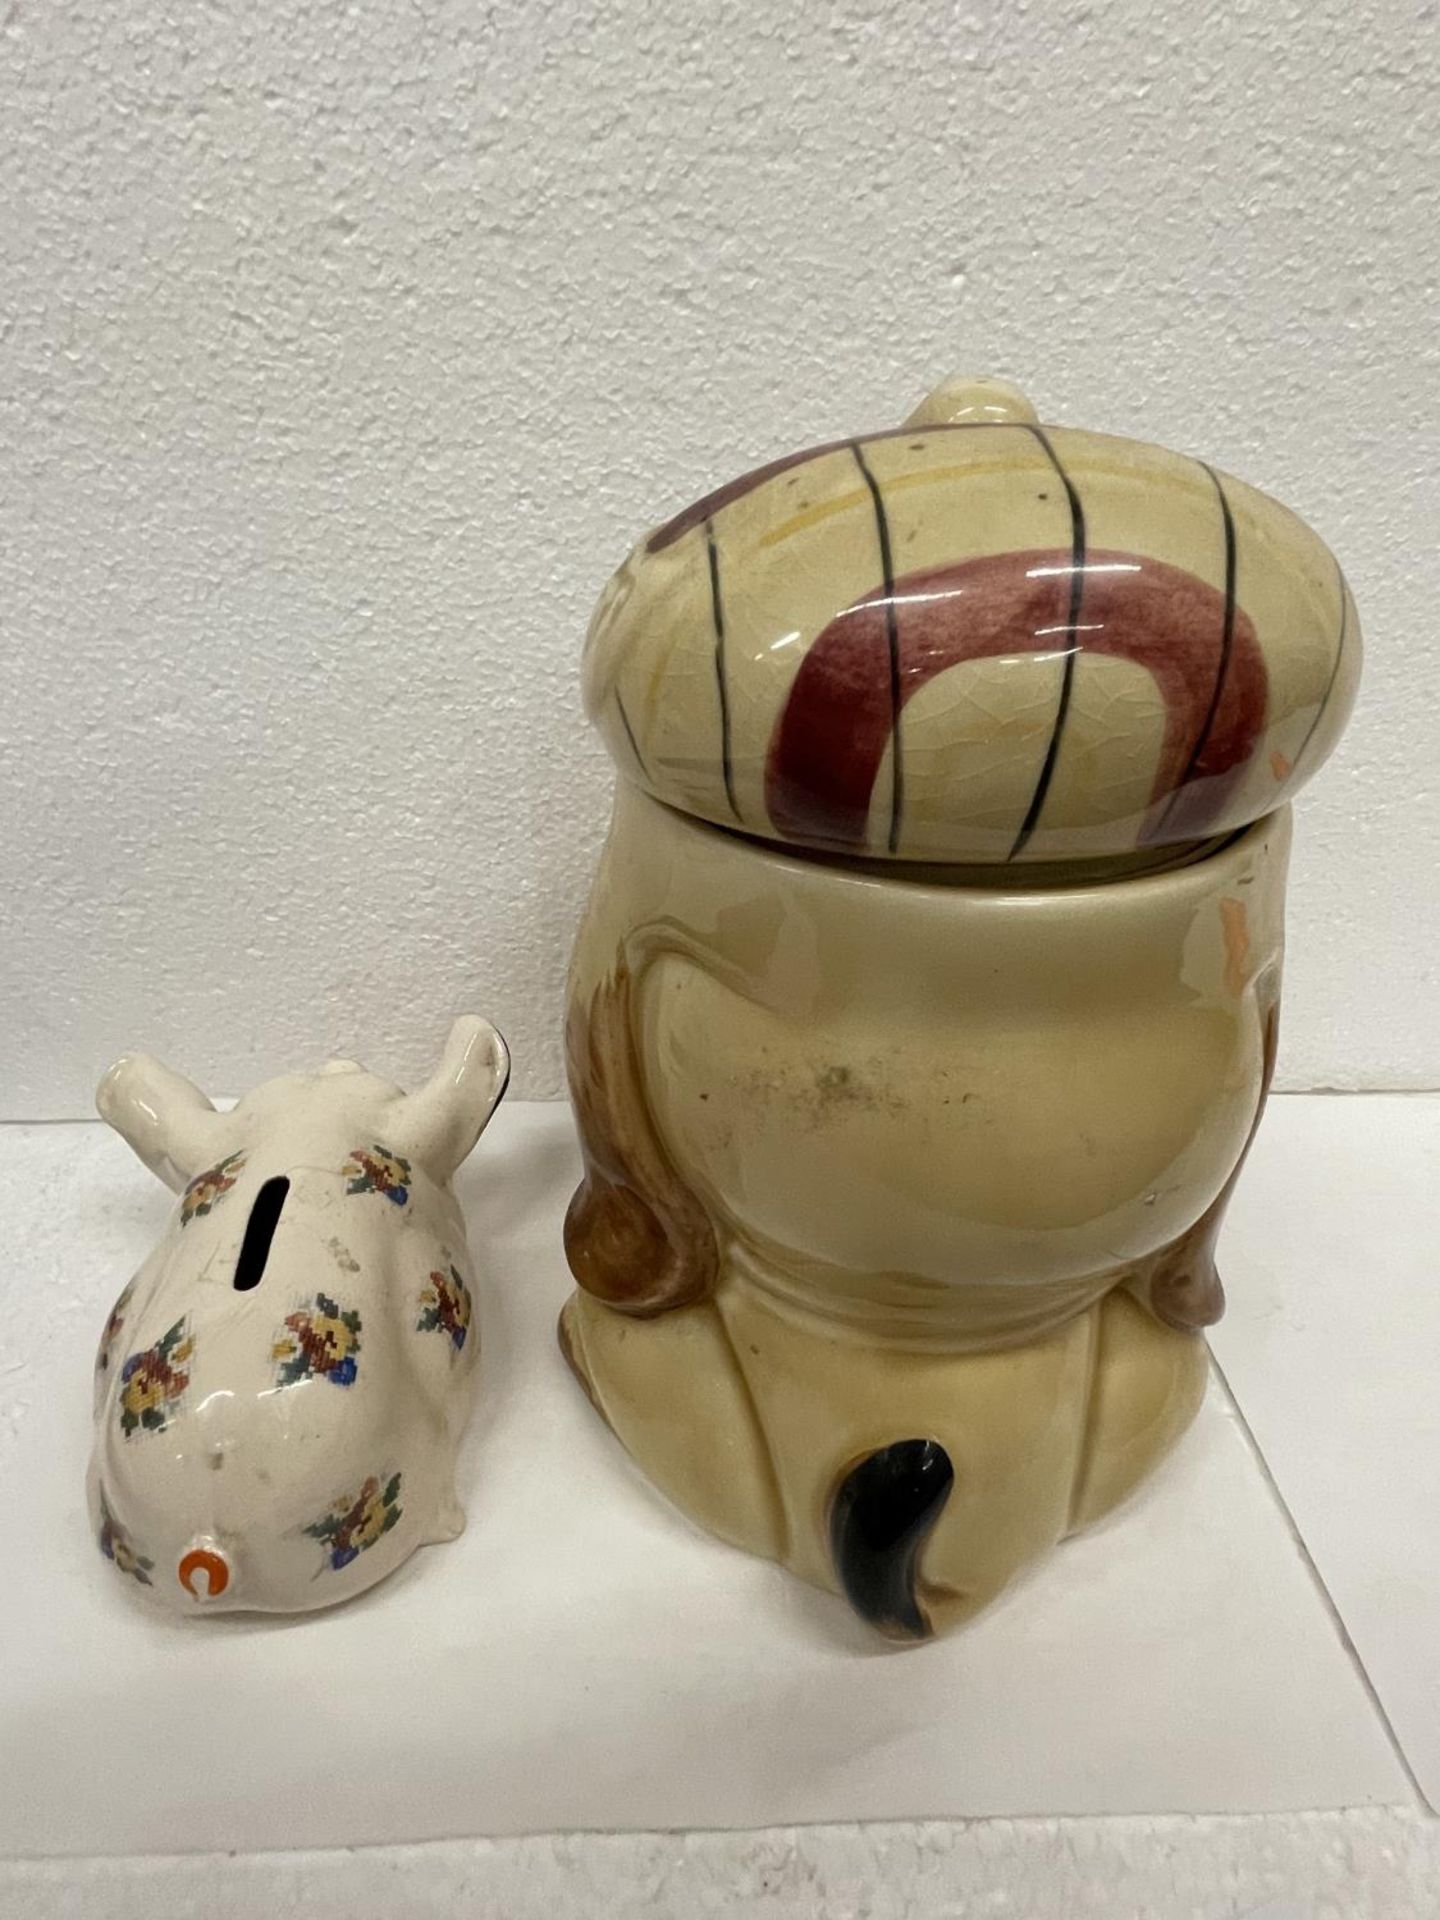 TWO PRICE BROTHERS ITEMS TO INCLUDE A DOG BISCUIT BARREL AND A PIG MONEY BOX - Image 3 of 6